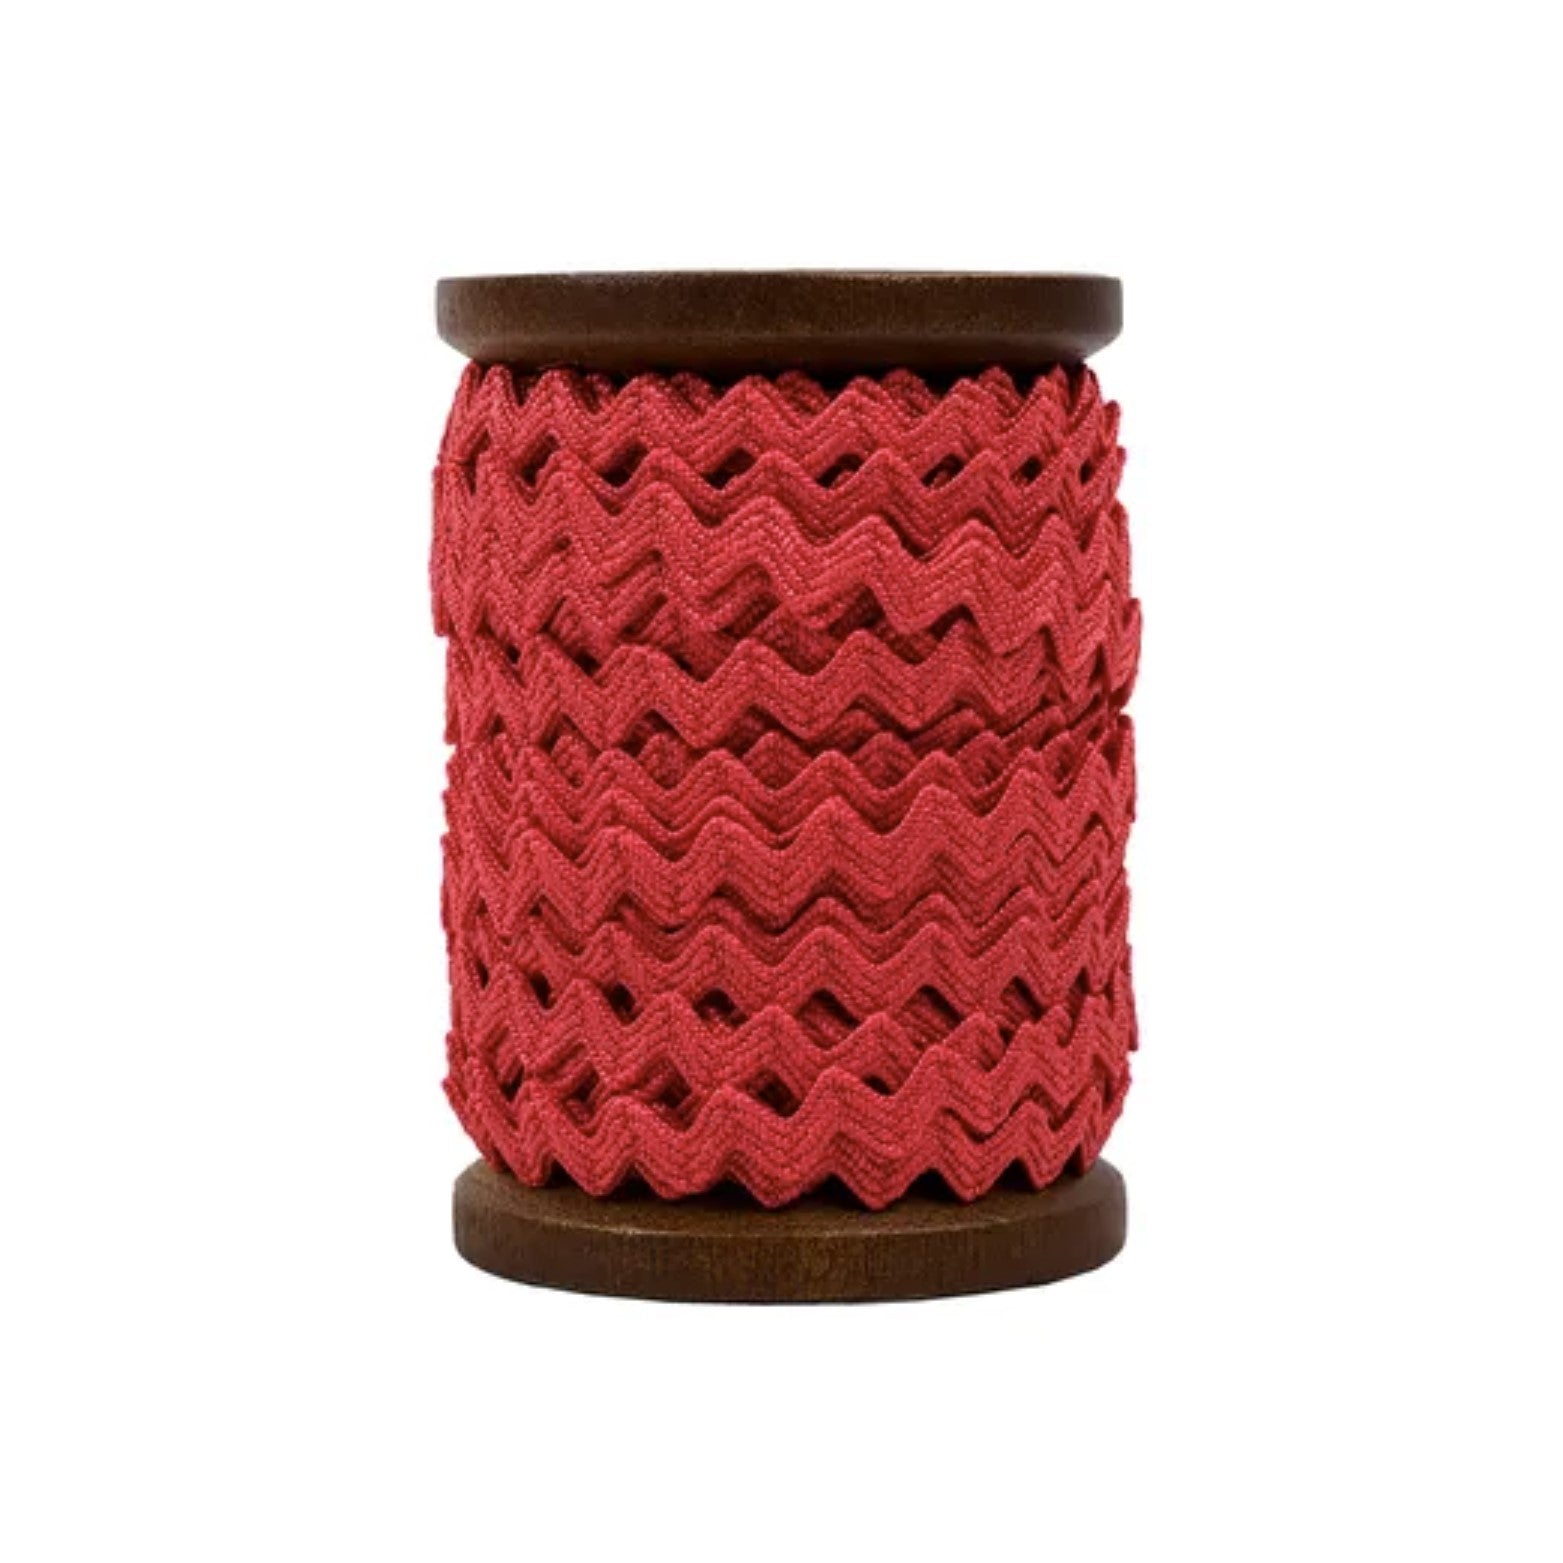 Jazzberry Jam Color, 12 yards Spool, Large Ric Rac Vintage Trim by Lori Holt of Bee in my Bonnet, Various Sizes